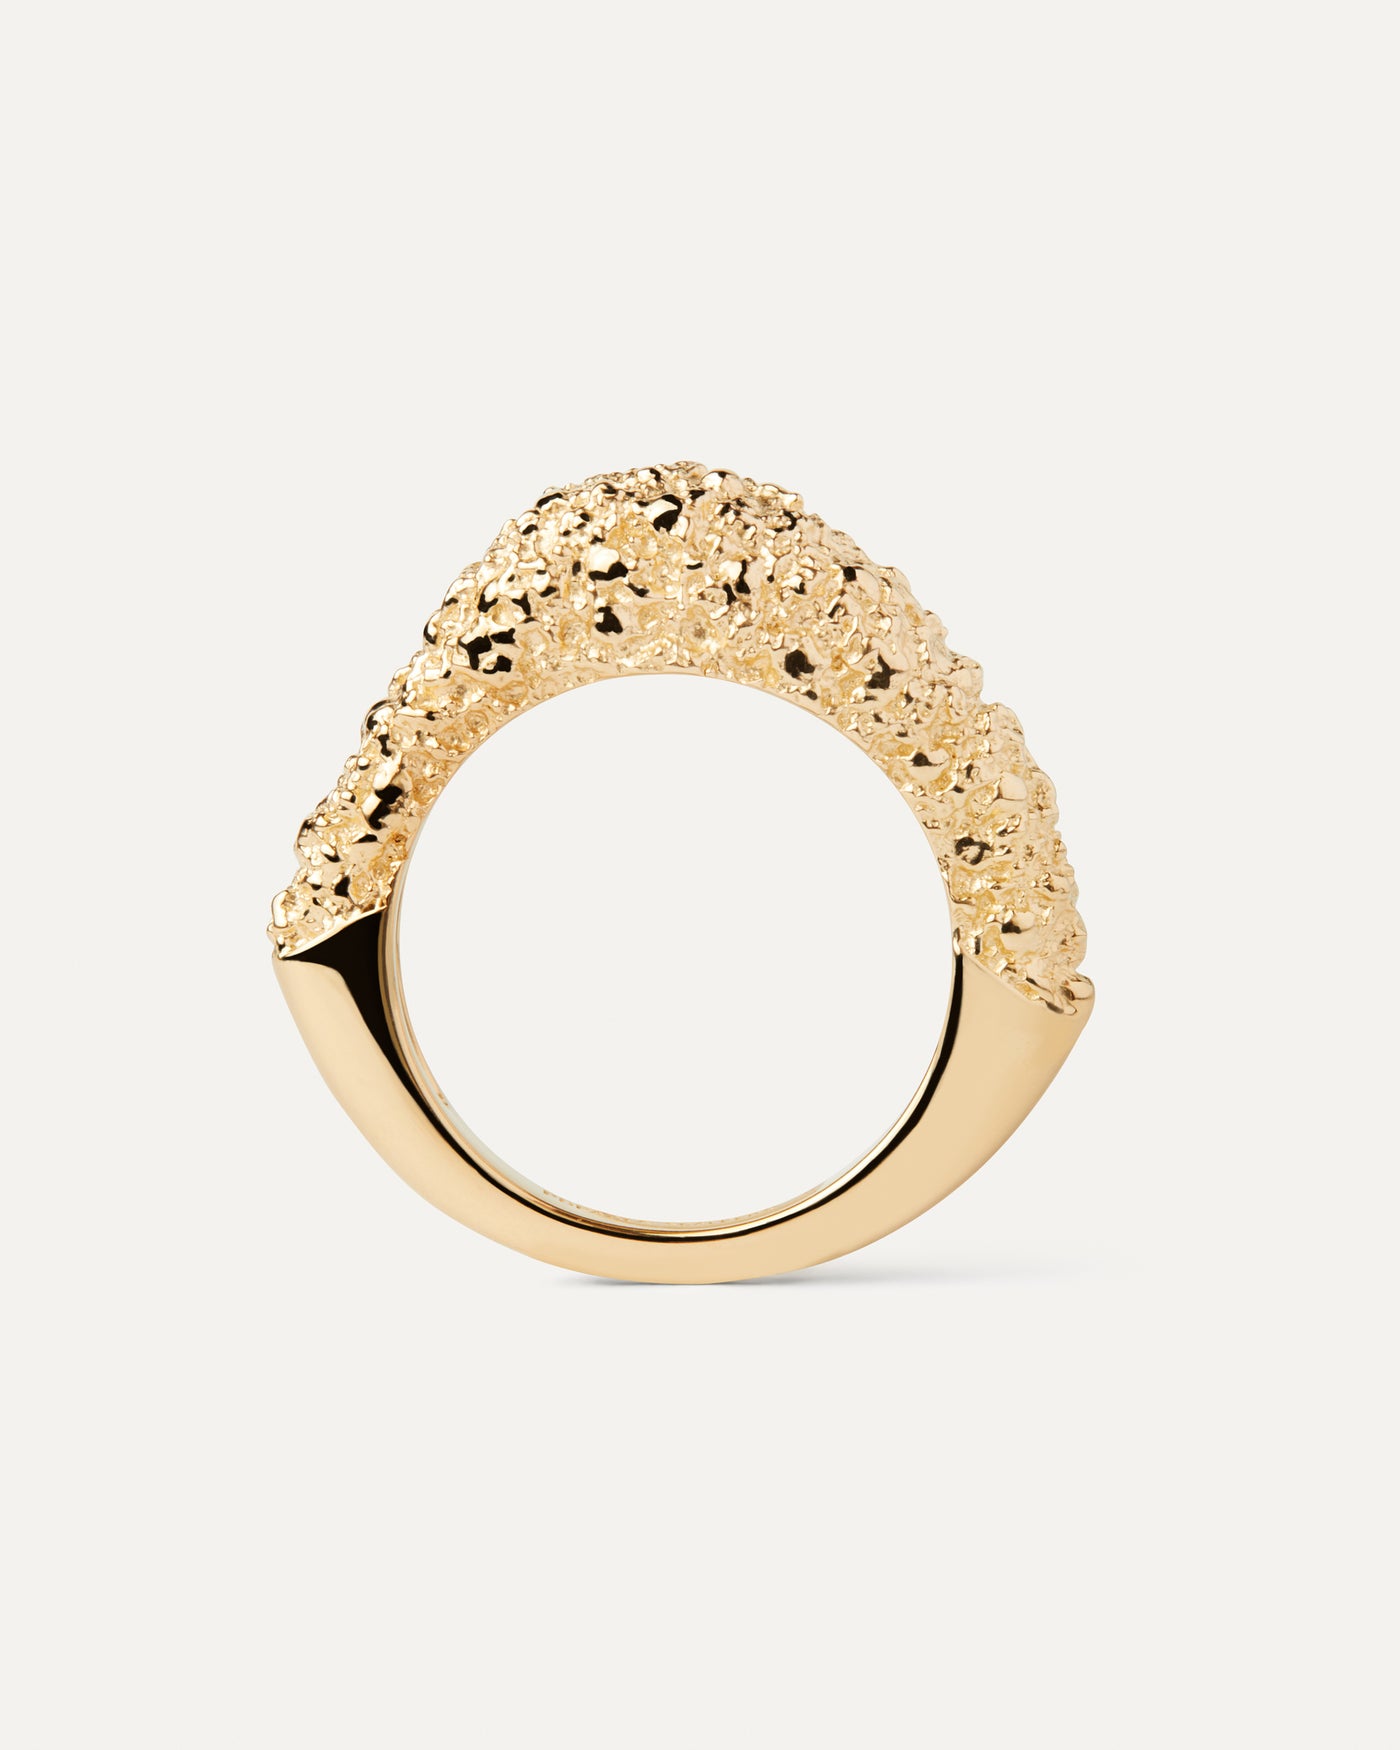 2023 Selection | Duna Ring. Gold-plated fluid shape stacking ring with contrasting molten texture finish. Get the latest arrival from PDPAOLA. Place your order safely and get this Best Seller. Free Shipping.